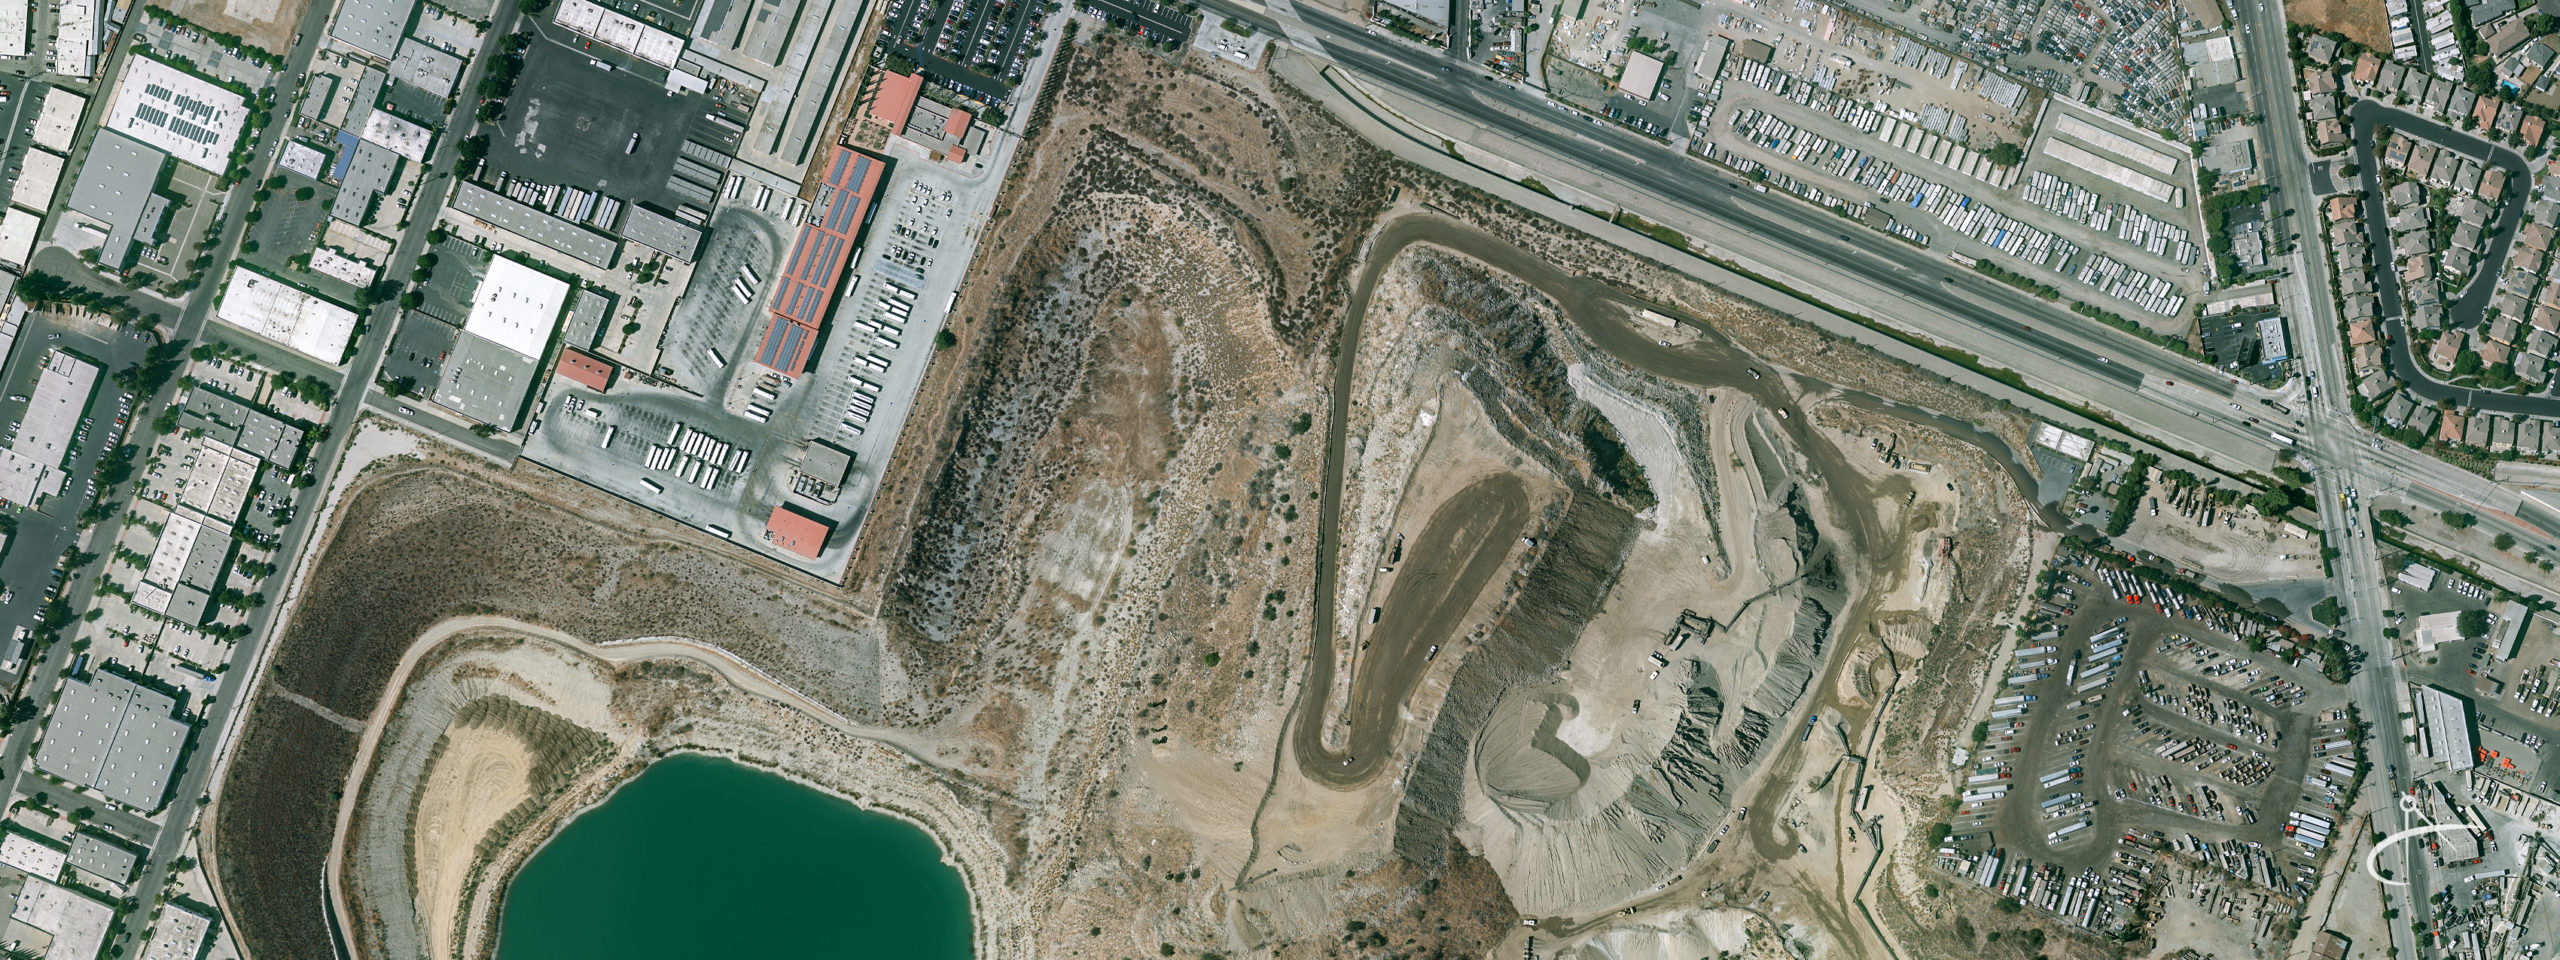 Gravel mine pit and industrial area.